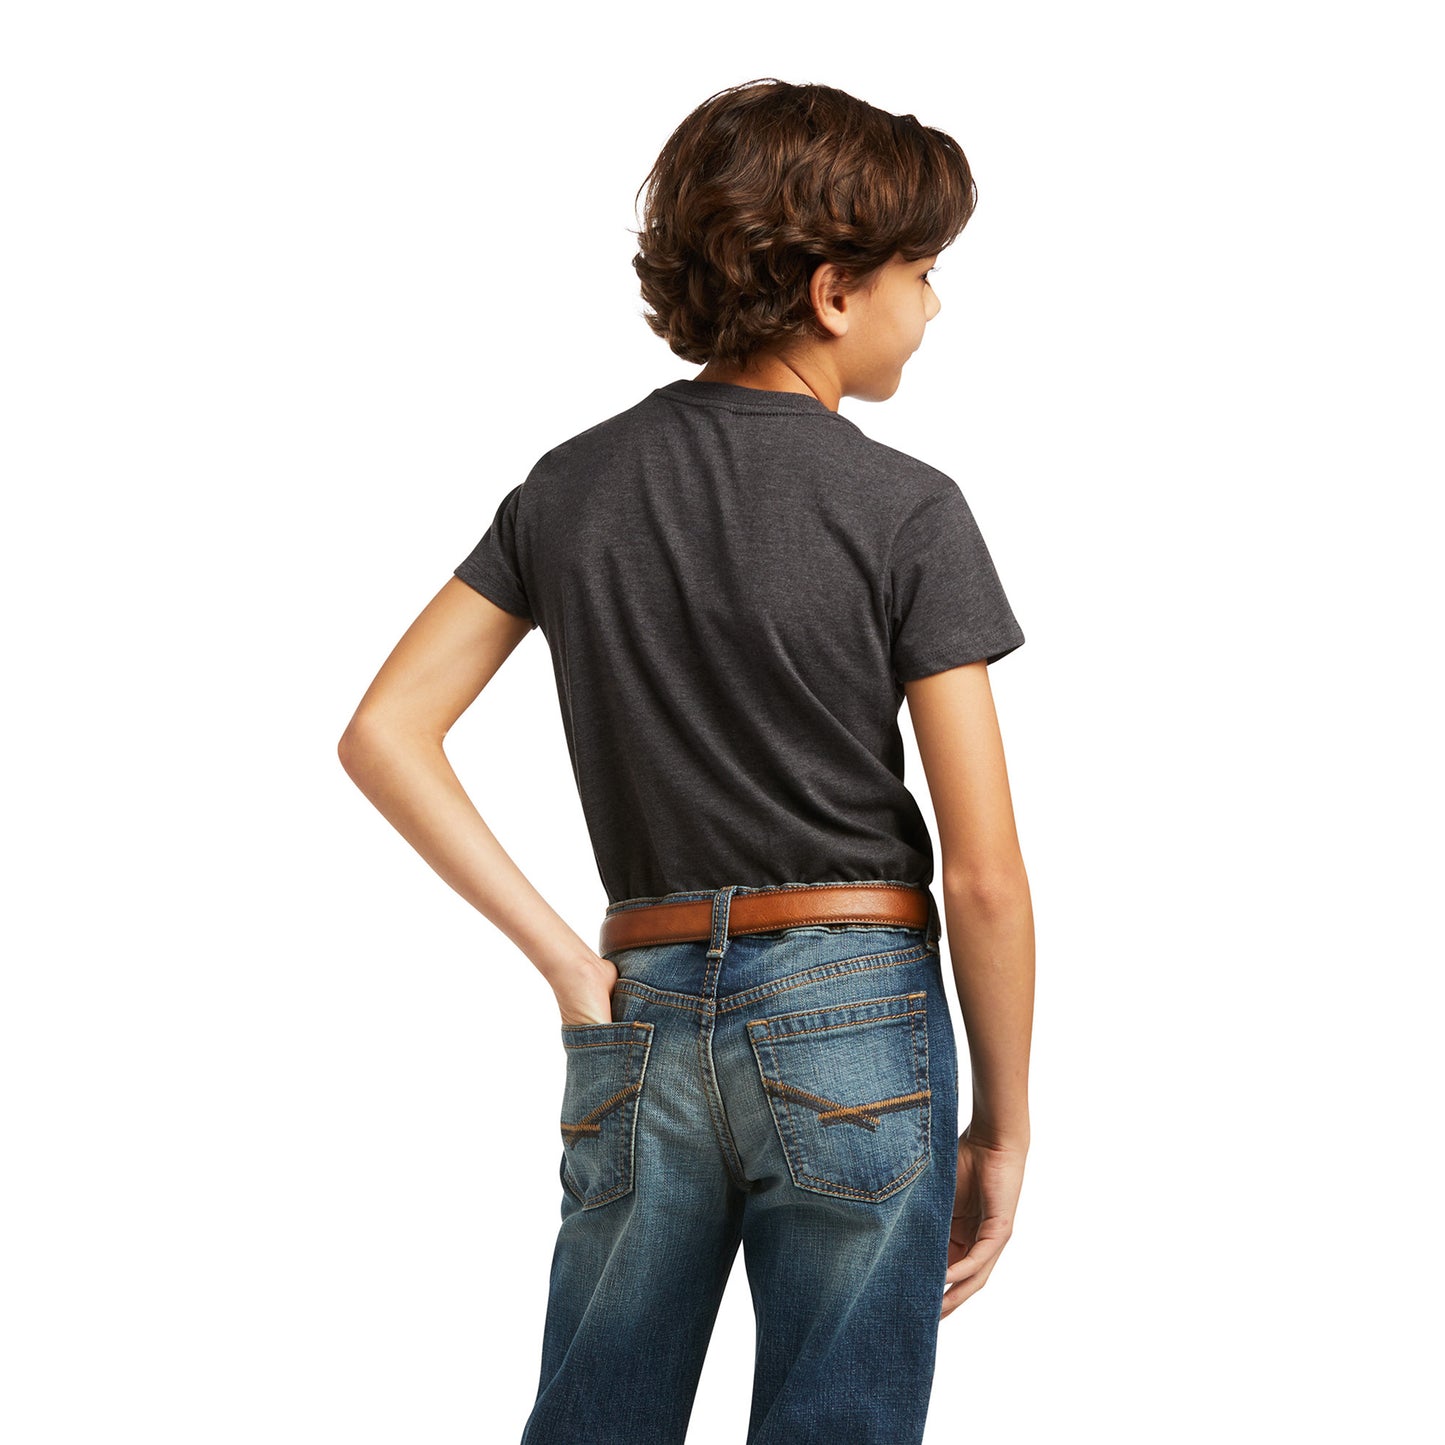 Ariat® Youth Boy's Short Sleeve Bred In The USA Charcoal Tee 10039938